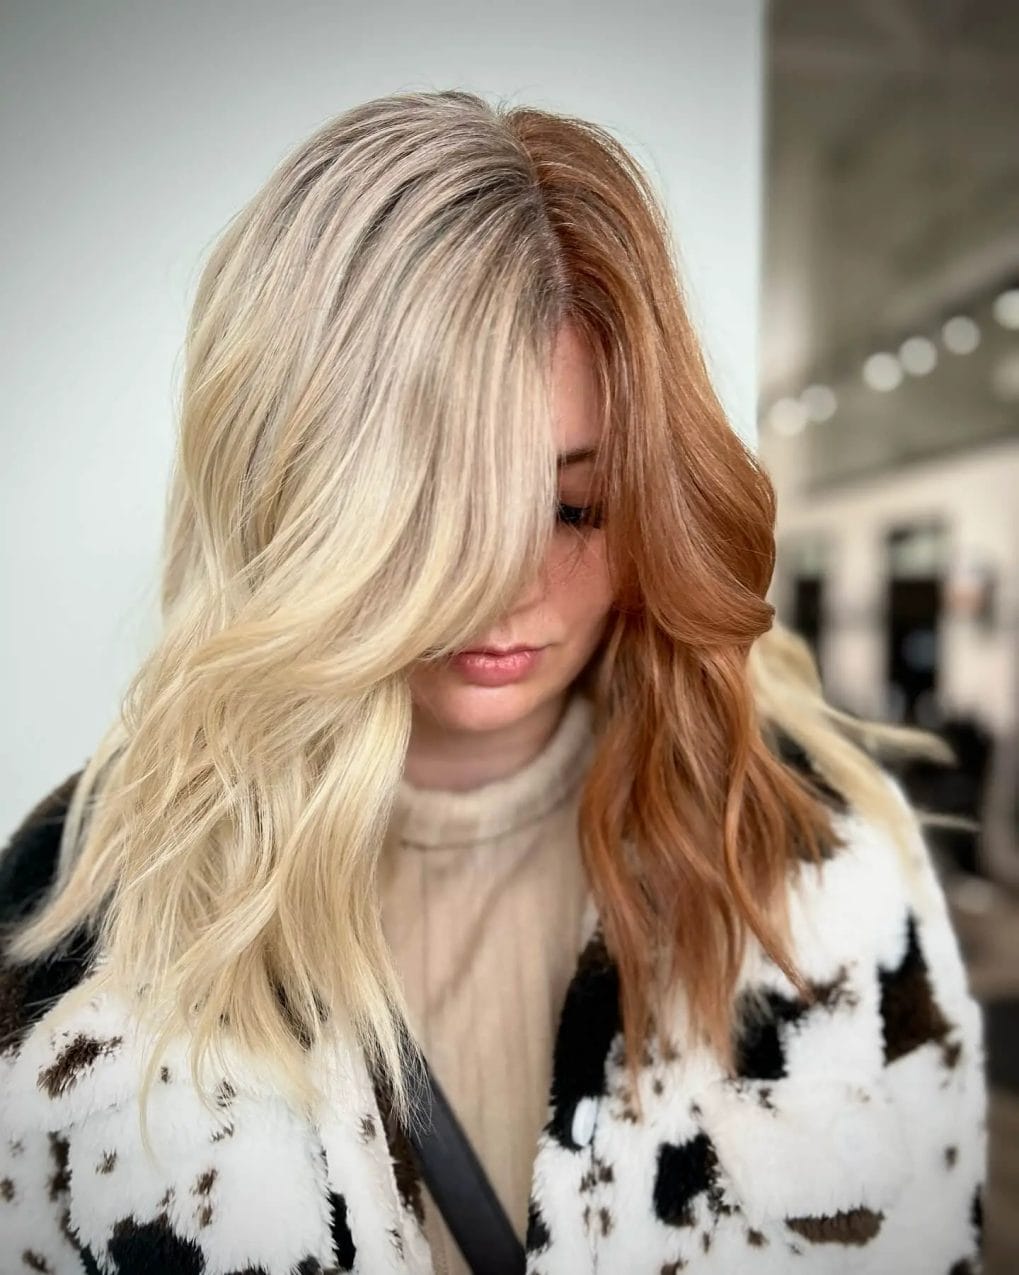 Cowboy copper and blonde waves in a subtle half and half style